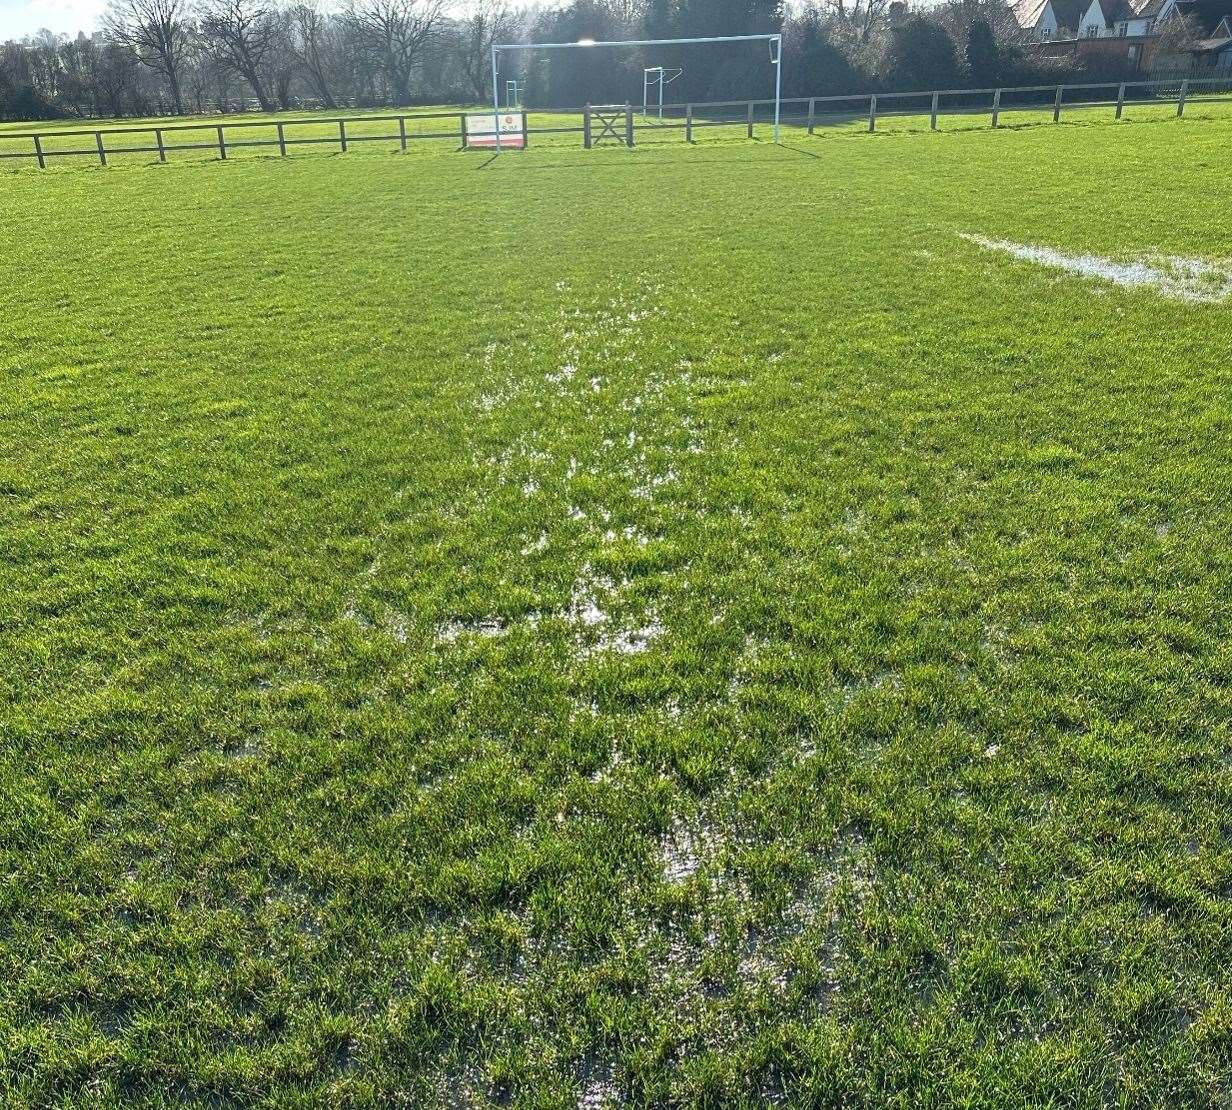 Paddock Wood football club have not been able to play a home game for three weeks in a row due to the pitch being waterlogged. Picture: John Hall